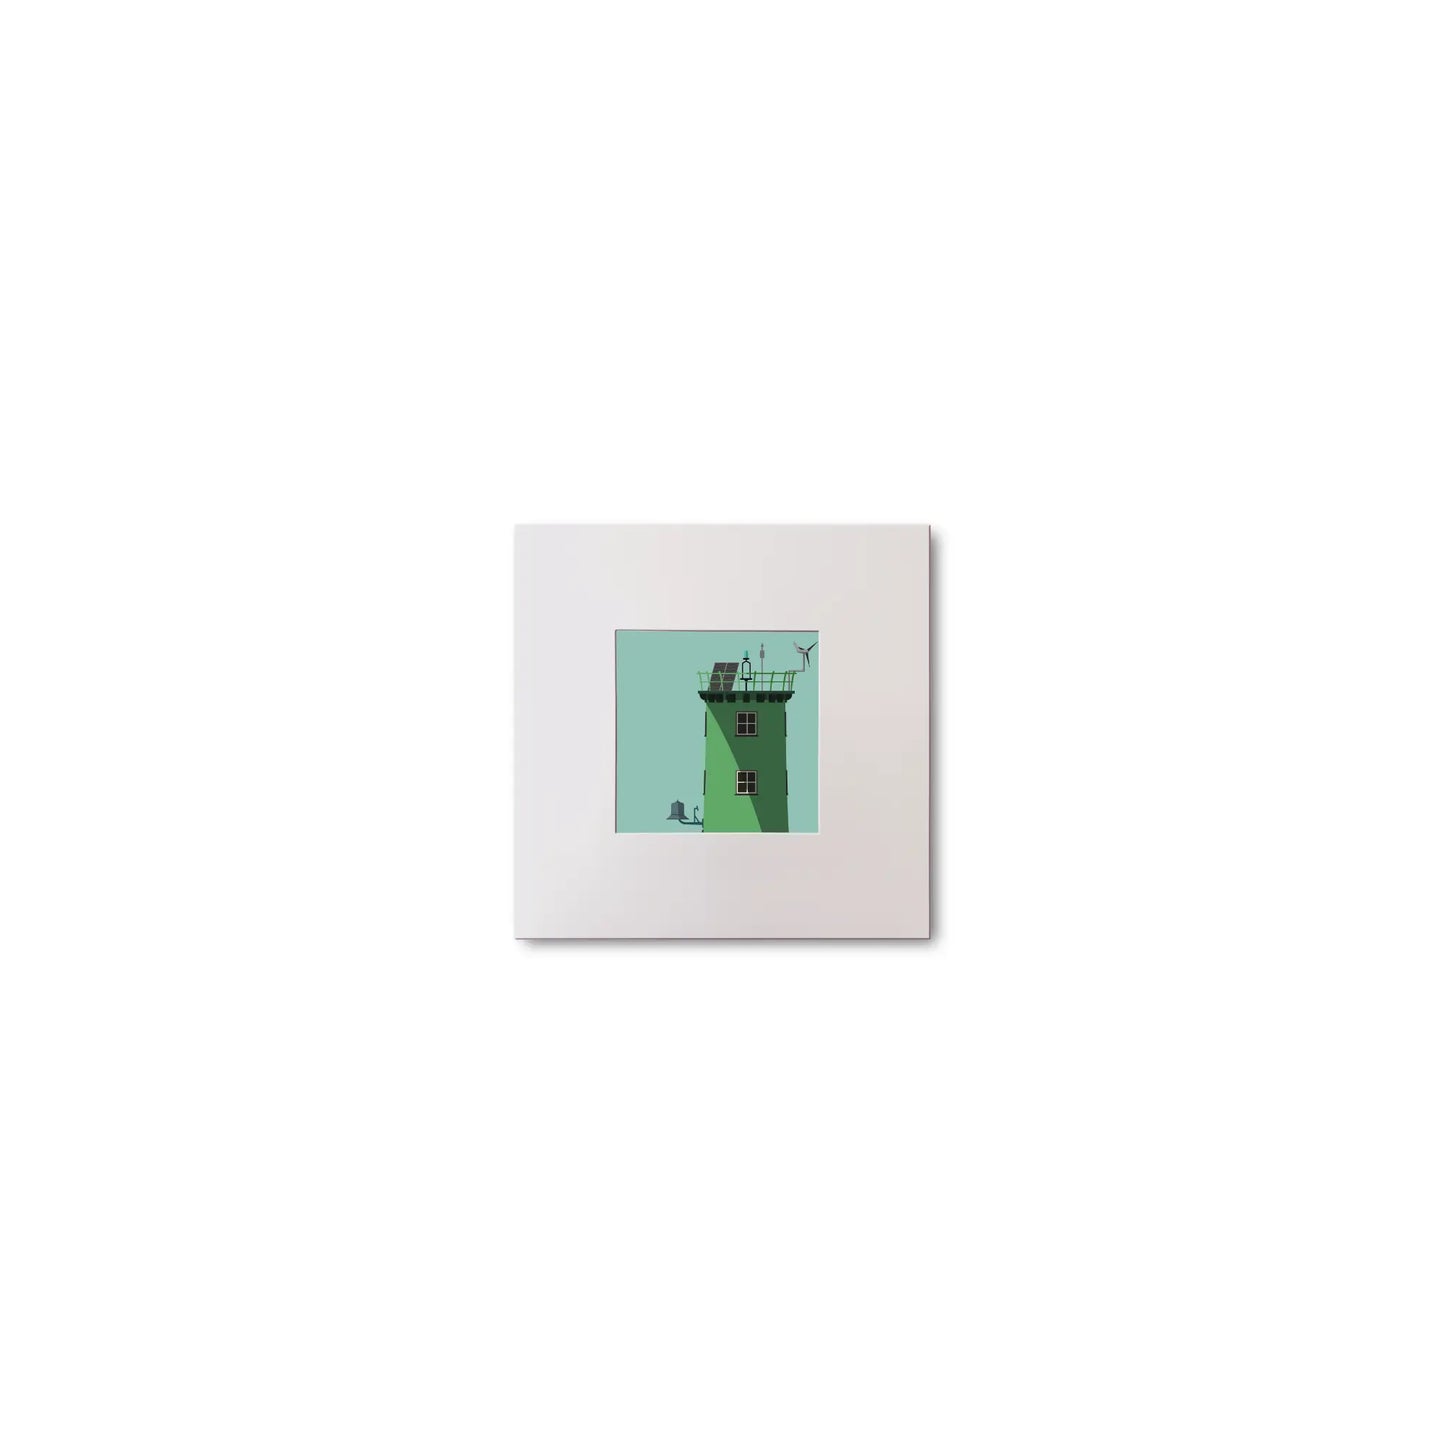 Illustration of North Bull lighthouse on an ocean green background, mounted and measuring 10x10cm.